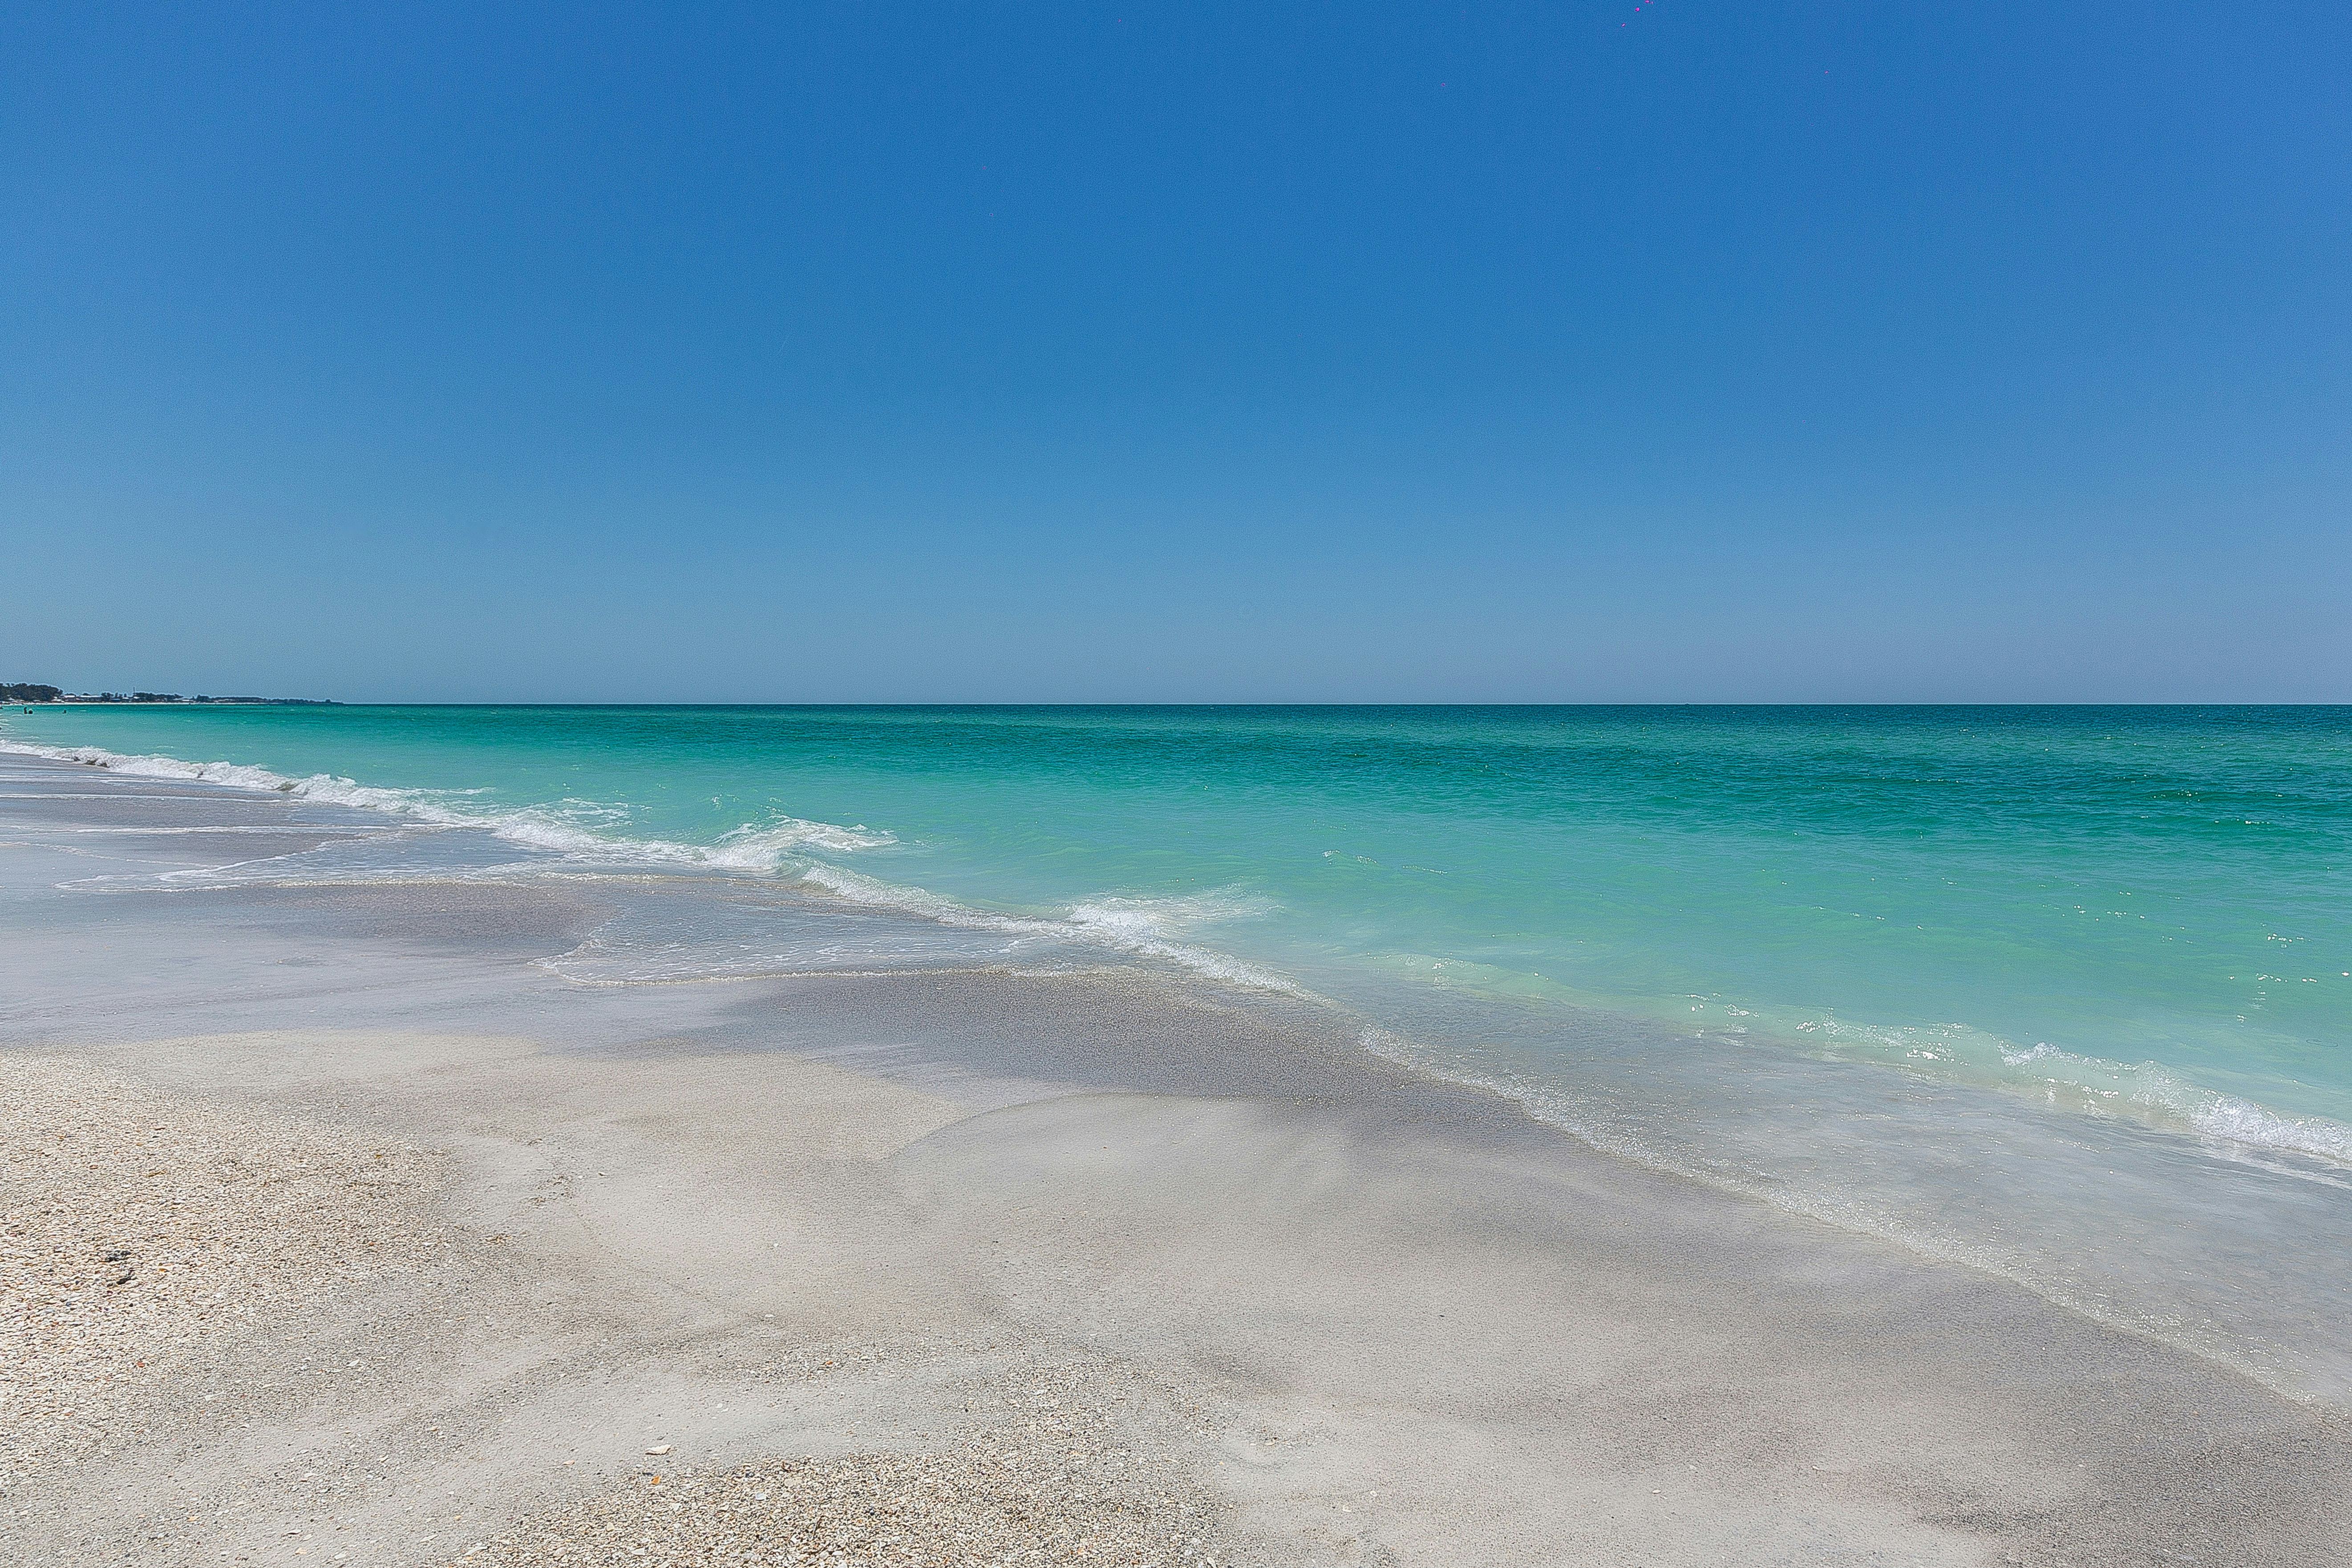 Anna Maria Island, near our new homes for sale in Ruskin, FL